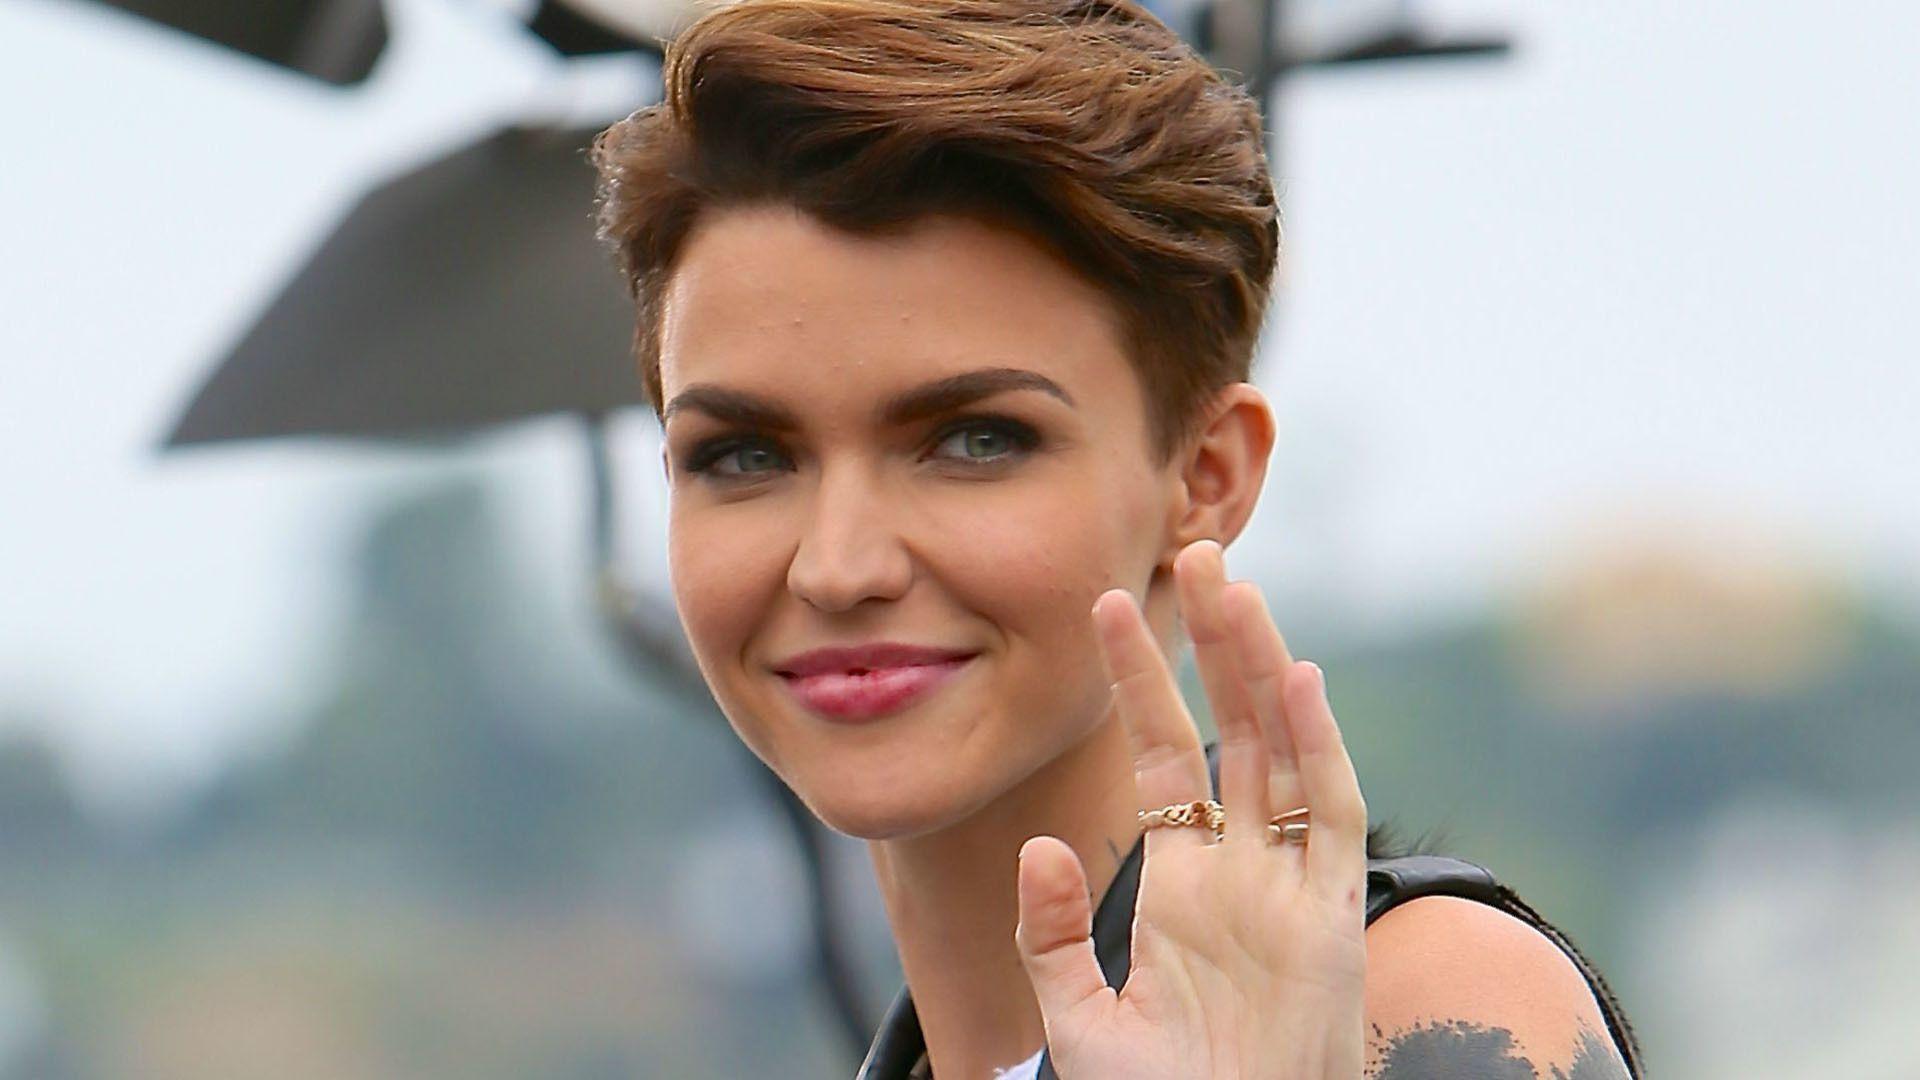 Ruby Rose Wallpapers Top Free Ruby Rose Backgrounds Images, Photos, Reviews